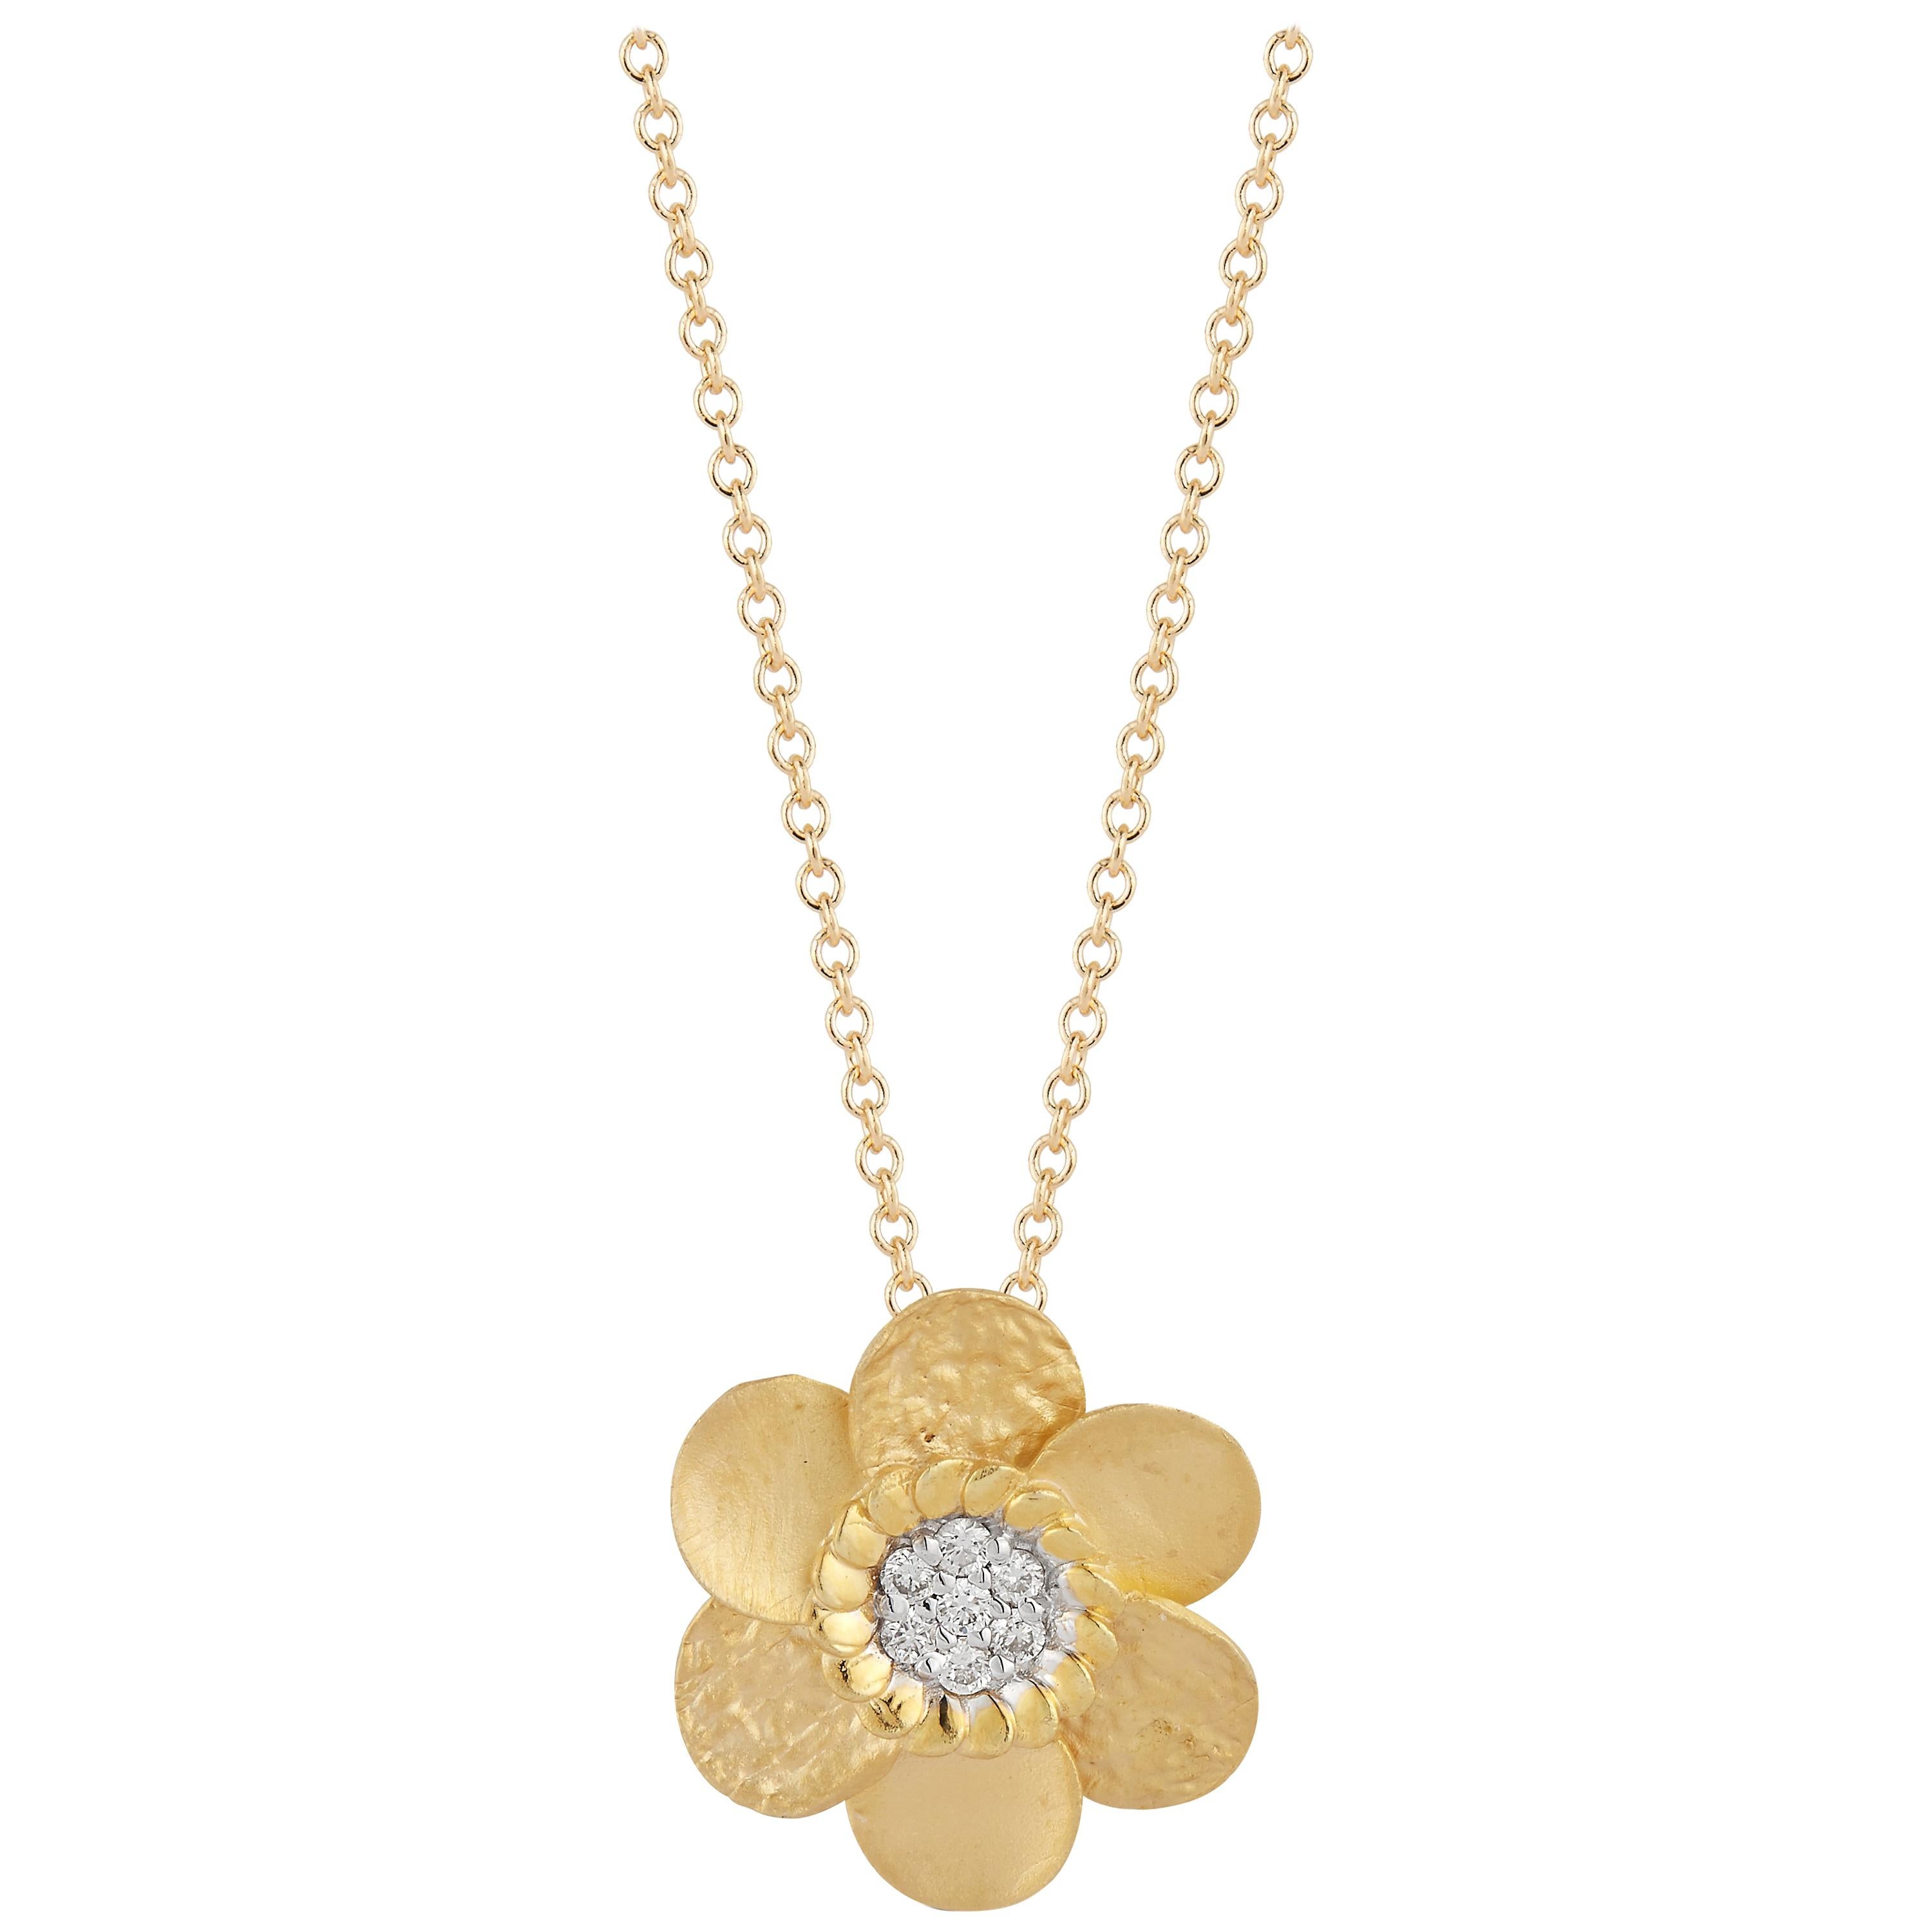 Handcrafted 14 Karat Yellow Gold Mixed-Finish Daisy Pendant For Sale